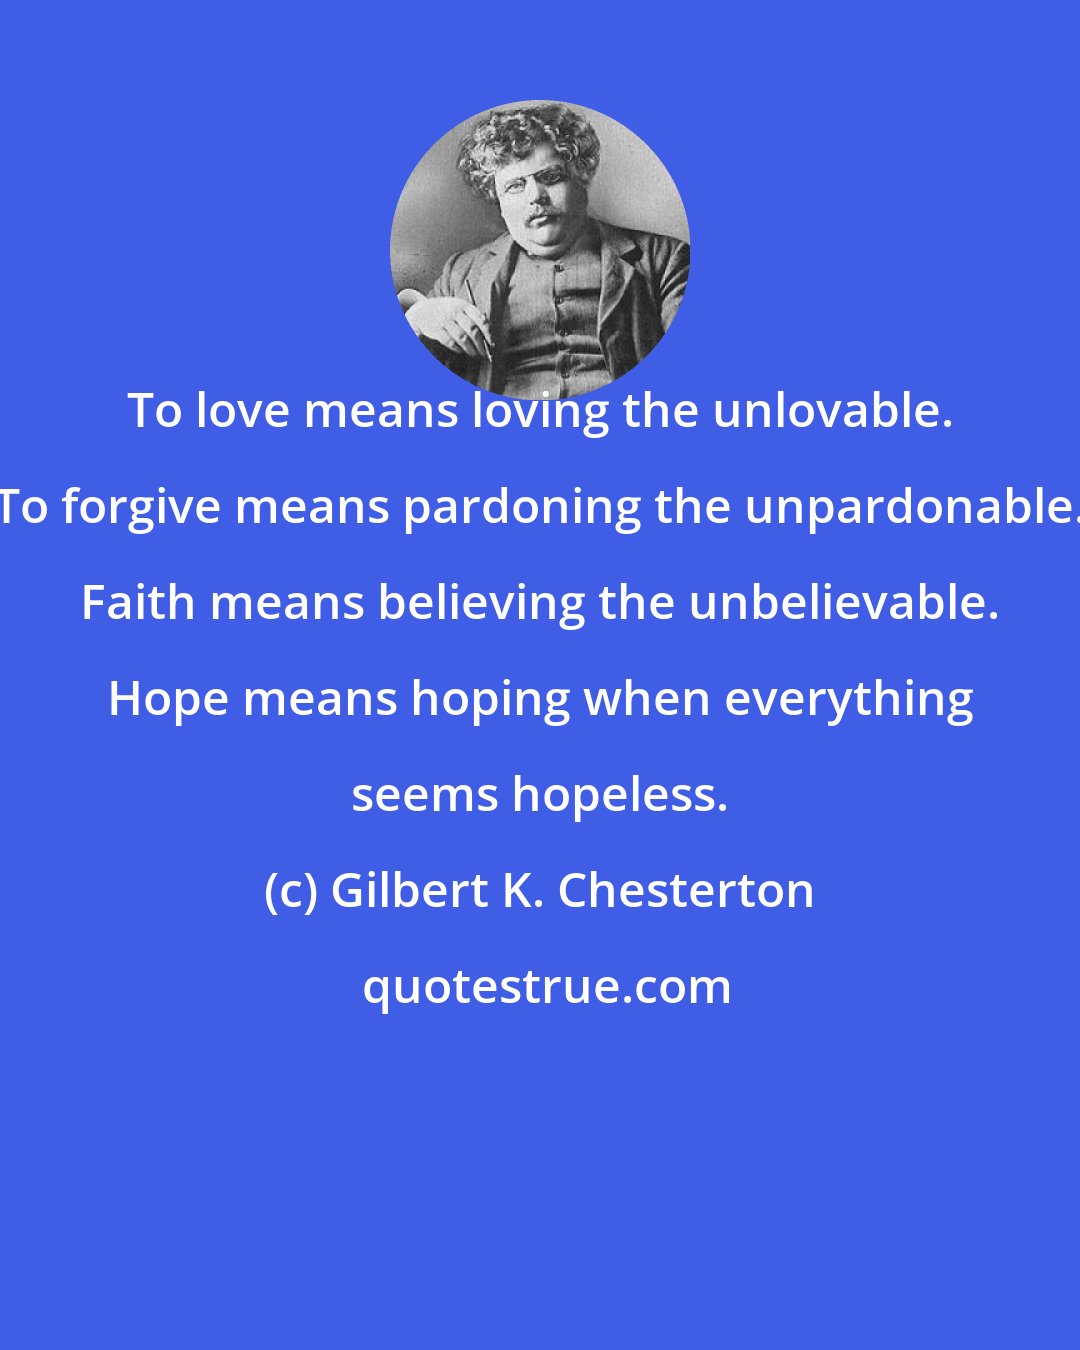 Gilbert K. Chesterton: To love means loving the unlovable. To forgive means pardoning the unpardonable. Faith means believing the unbelievable. Hope means hoping when everything seems hopeless.